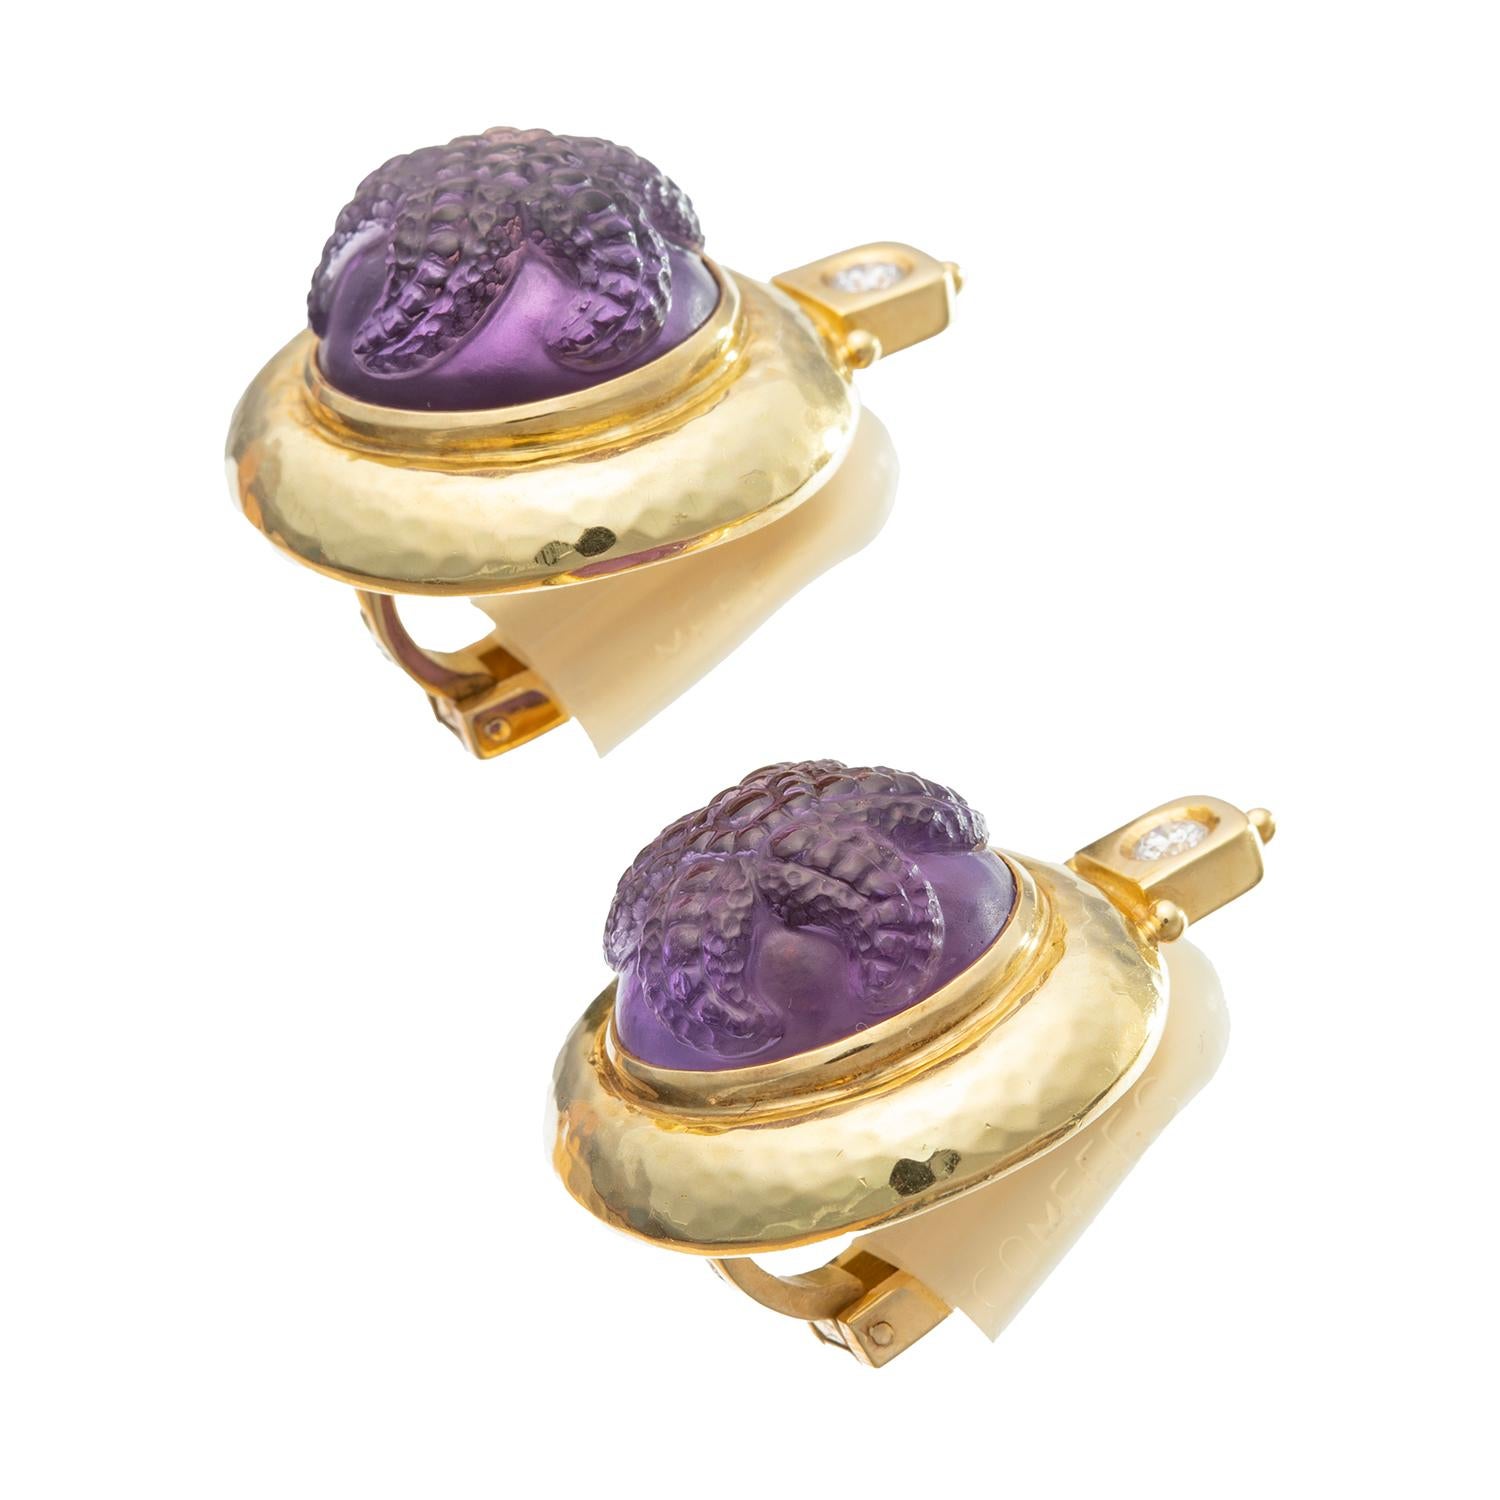 Elizabeth Gage clip earrings in hammered 18k yellow gold each centering a bezel-set cabochon-cut amethyst with a carved starfish, as well as round brilliant-cut diamond surmount.  Amethysts measuring approximately 16mm in diameter.  Two diamonds